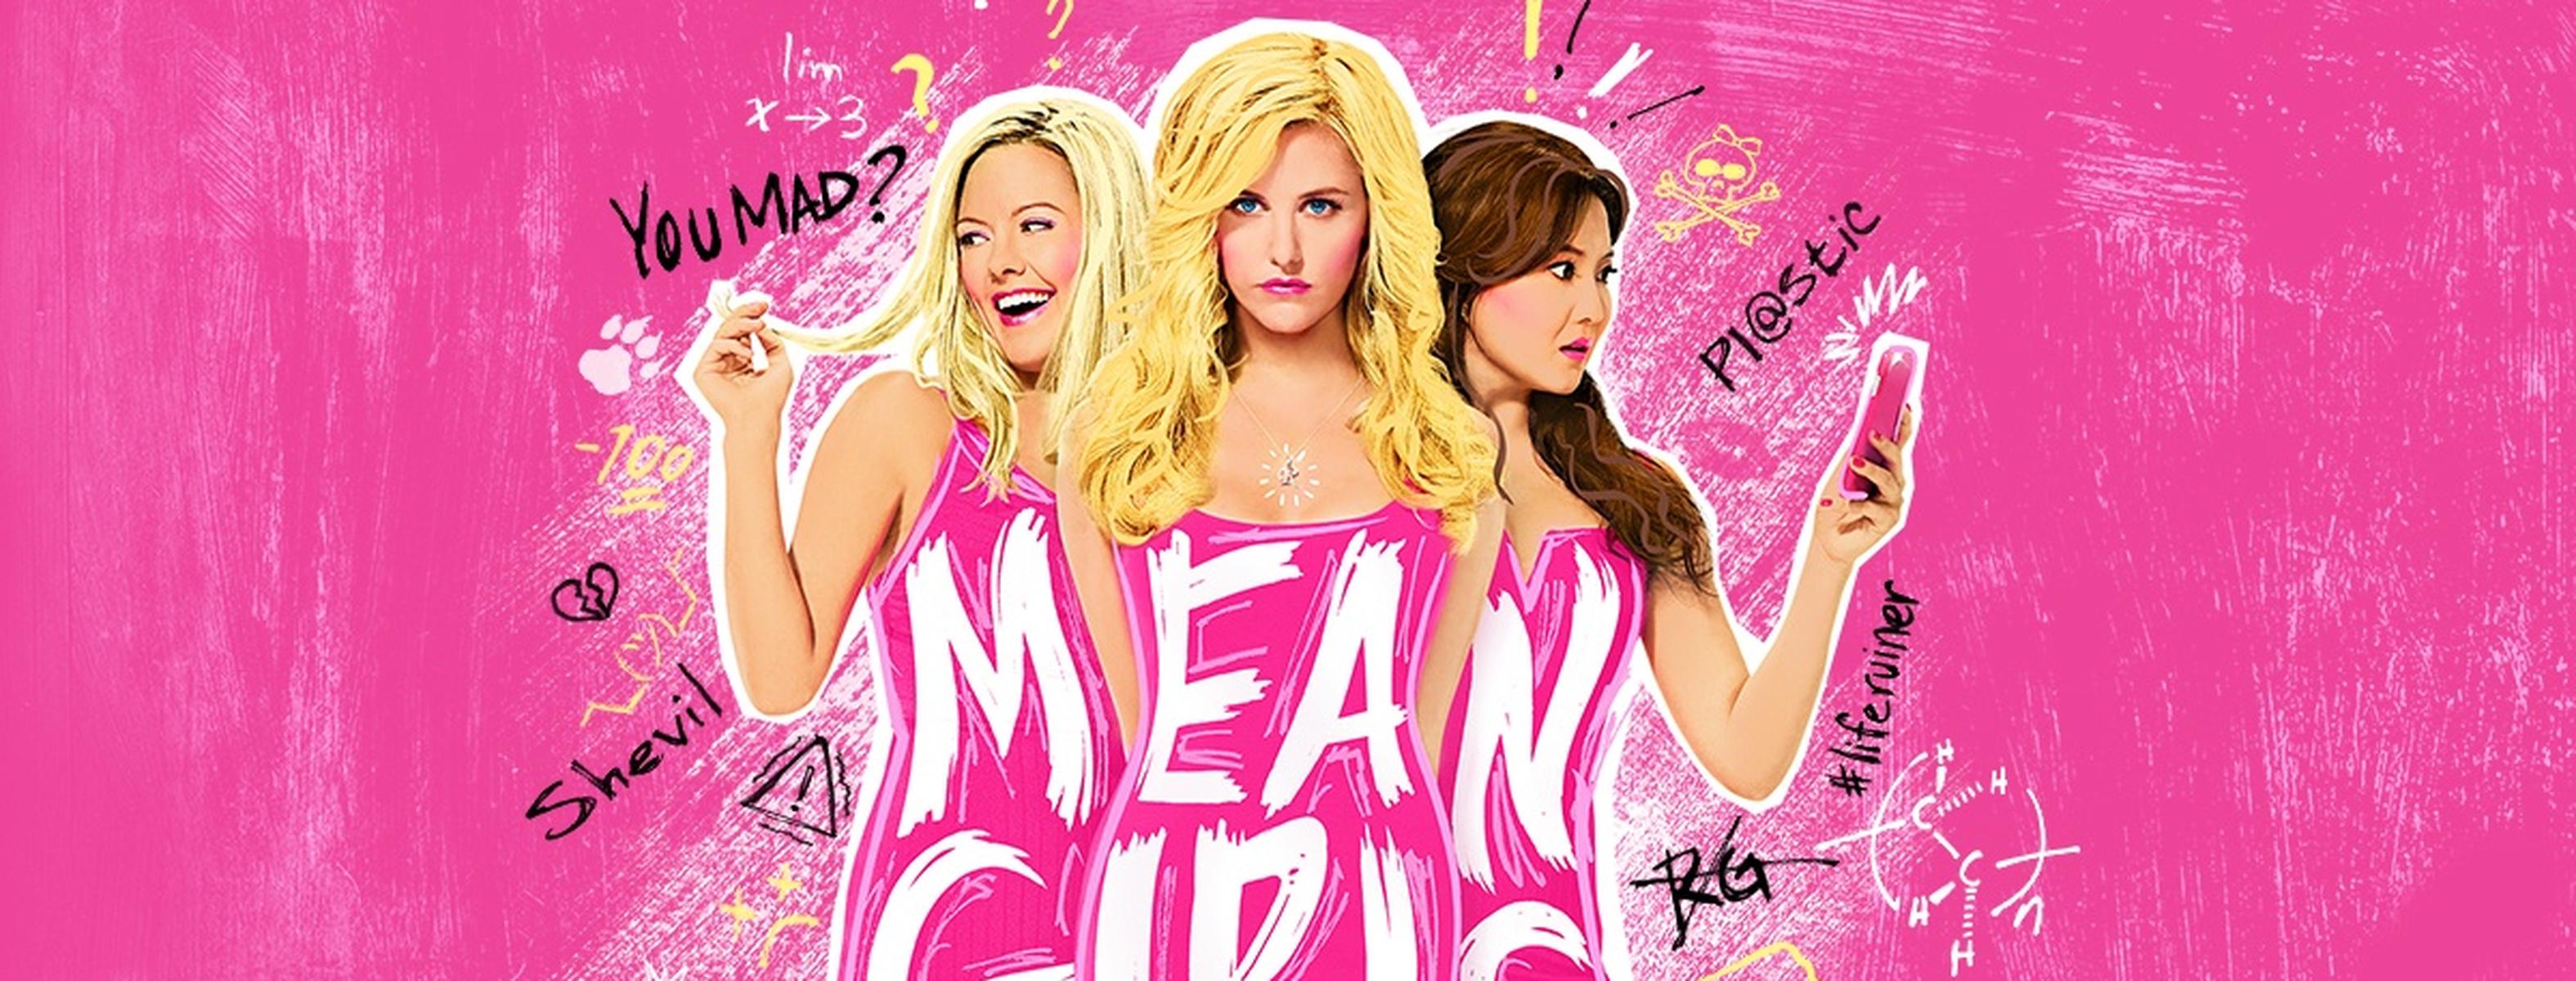 Meet The Cast Of Broadway S Mean Girls More Nyc Events 8 24 30